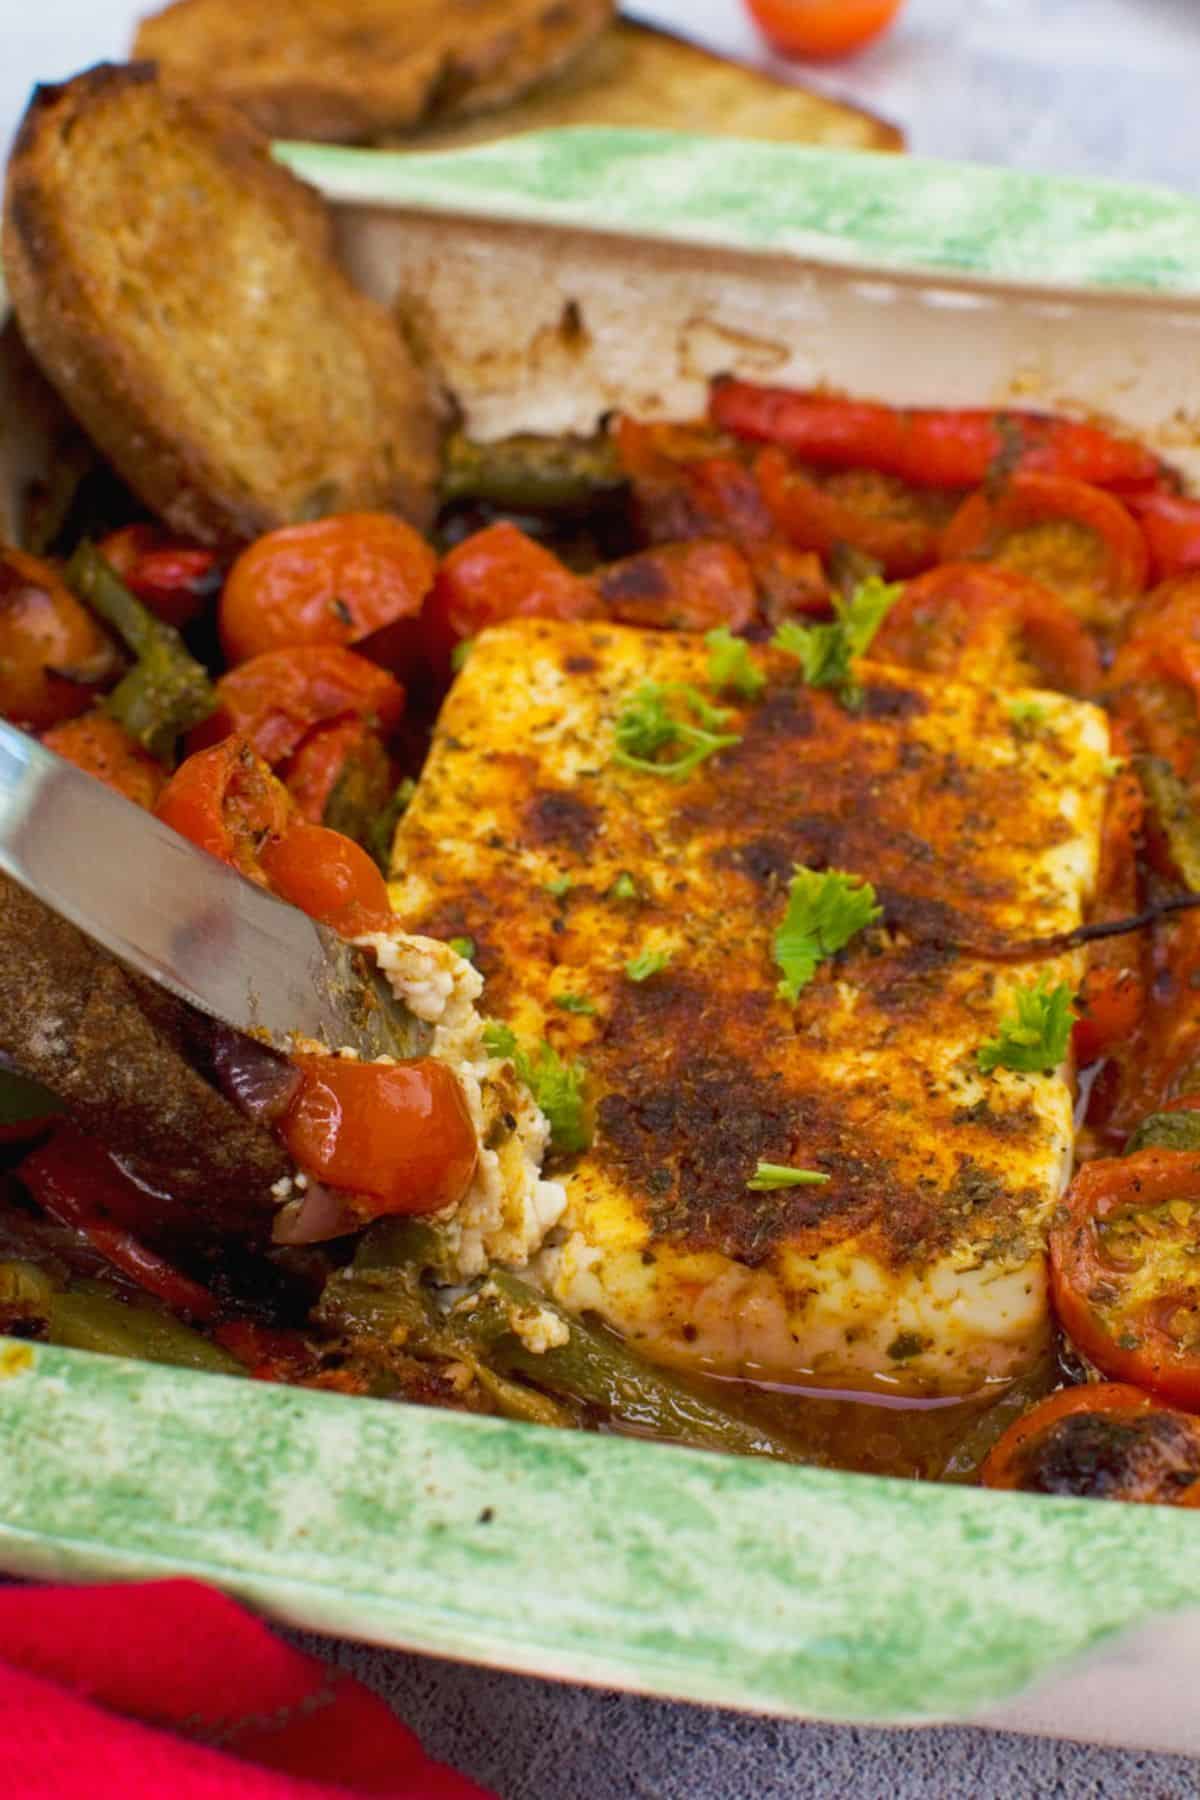 Crispy Baked Feta with Tomato and Red Pepper in a casserole.